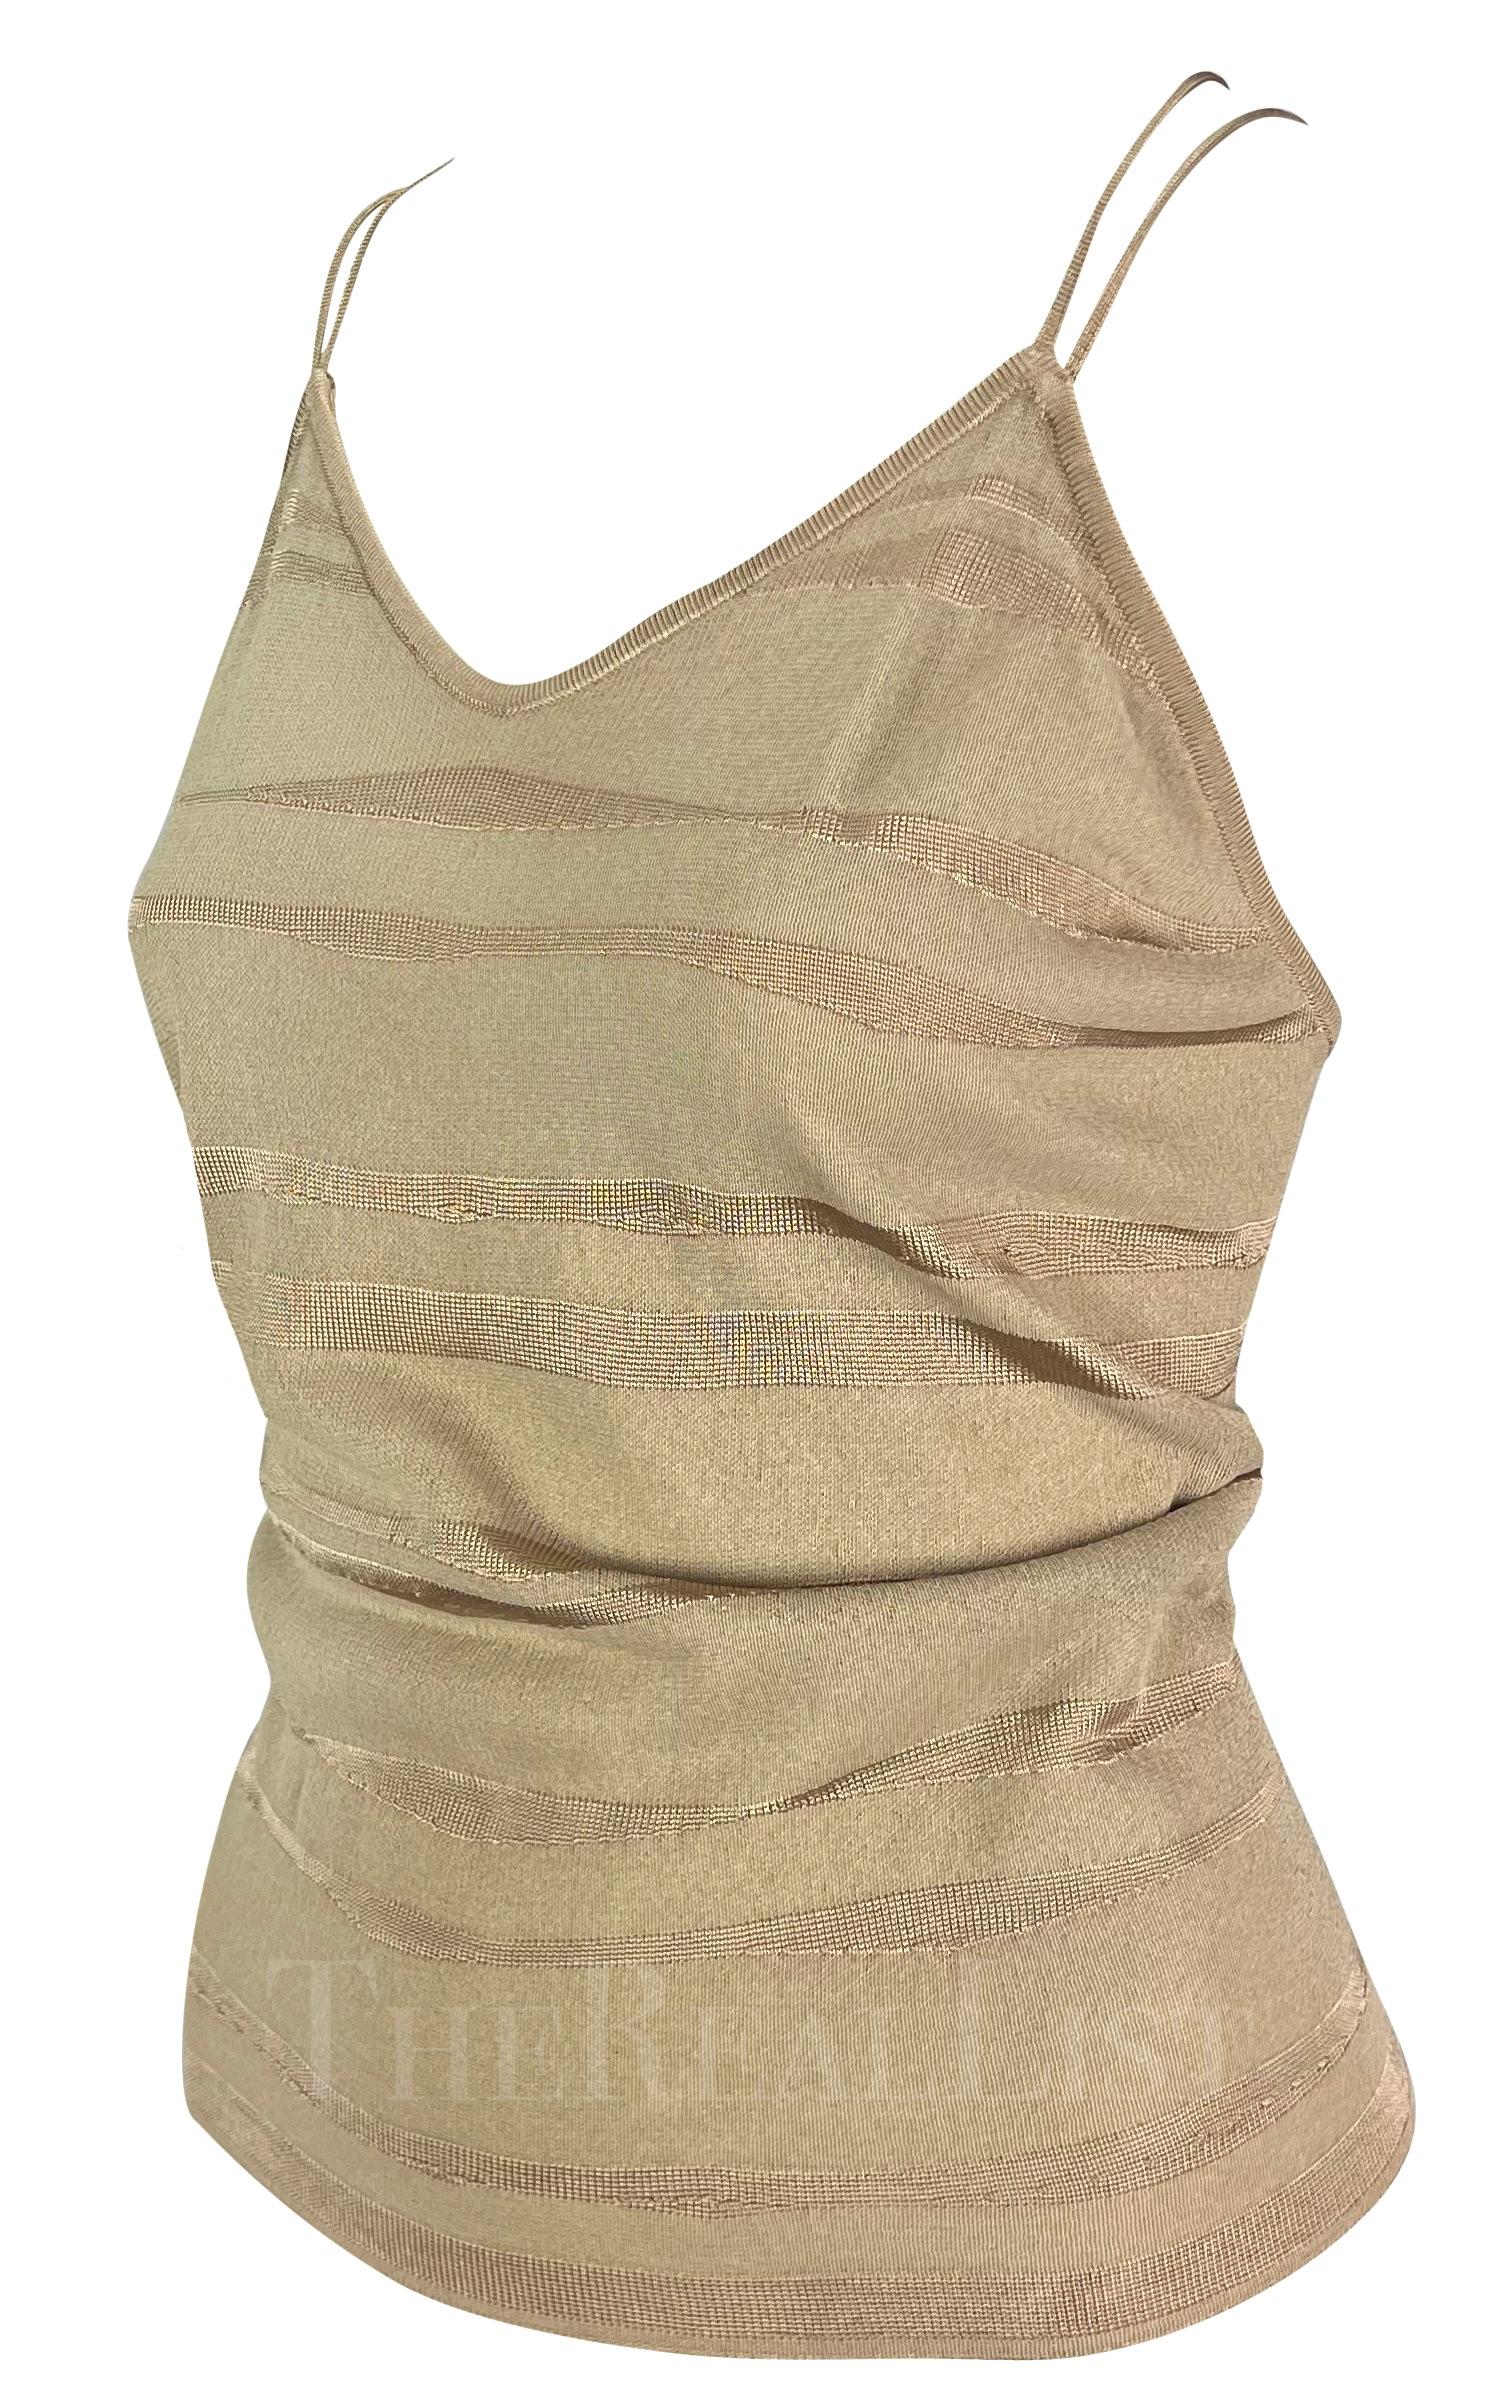 TheRealList presents: a chic beige Giorgio Armani knit tank top. From the 1990s, this top features a knit undulating stripe pattern throughout and is made complete with spaghetti shoulder straps that cross the semi-exposed back creating a diamond